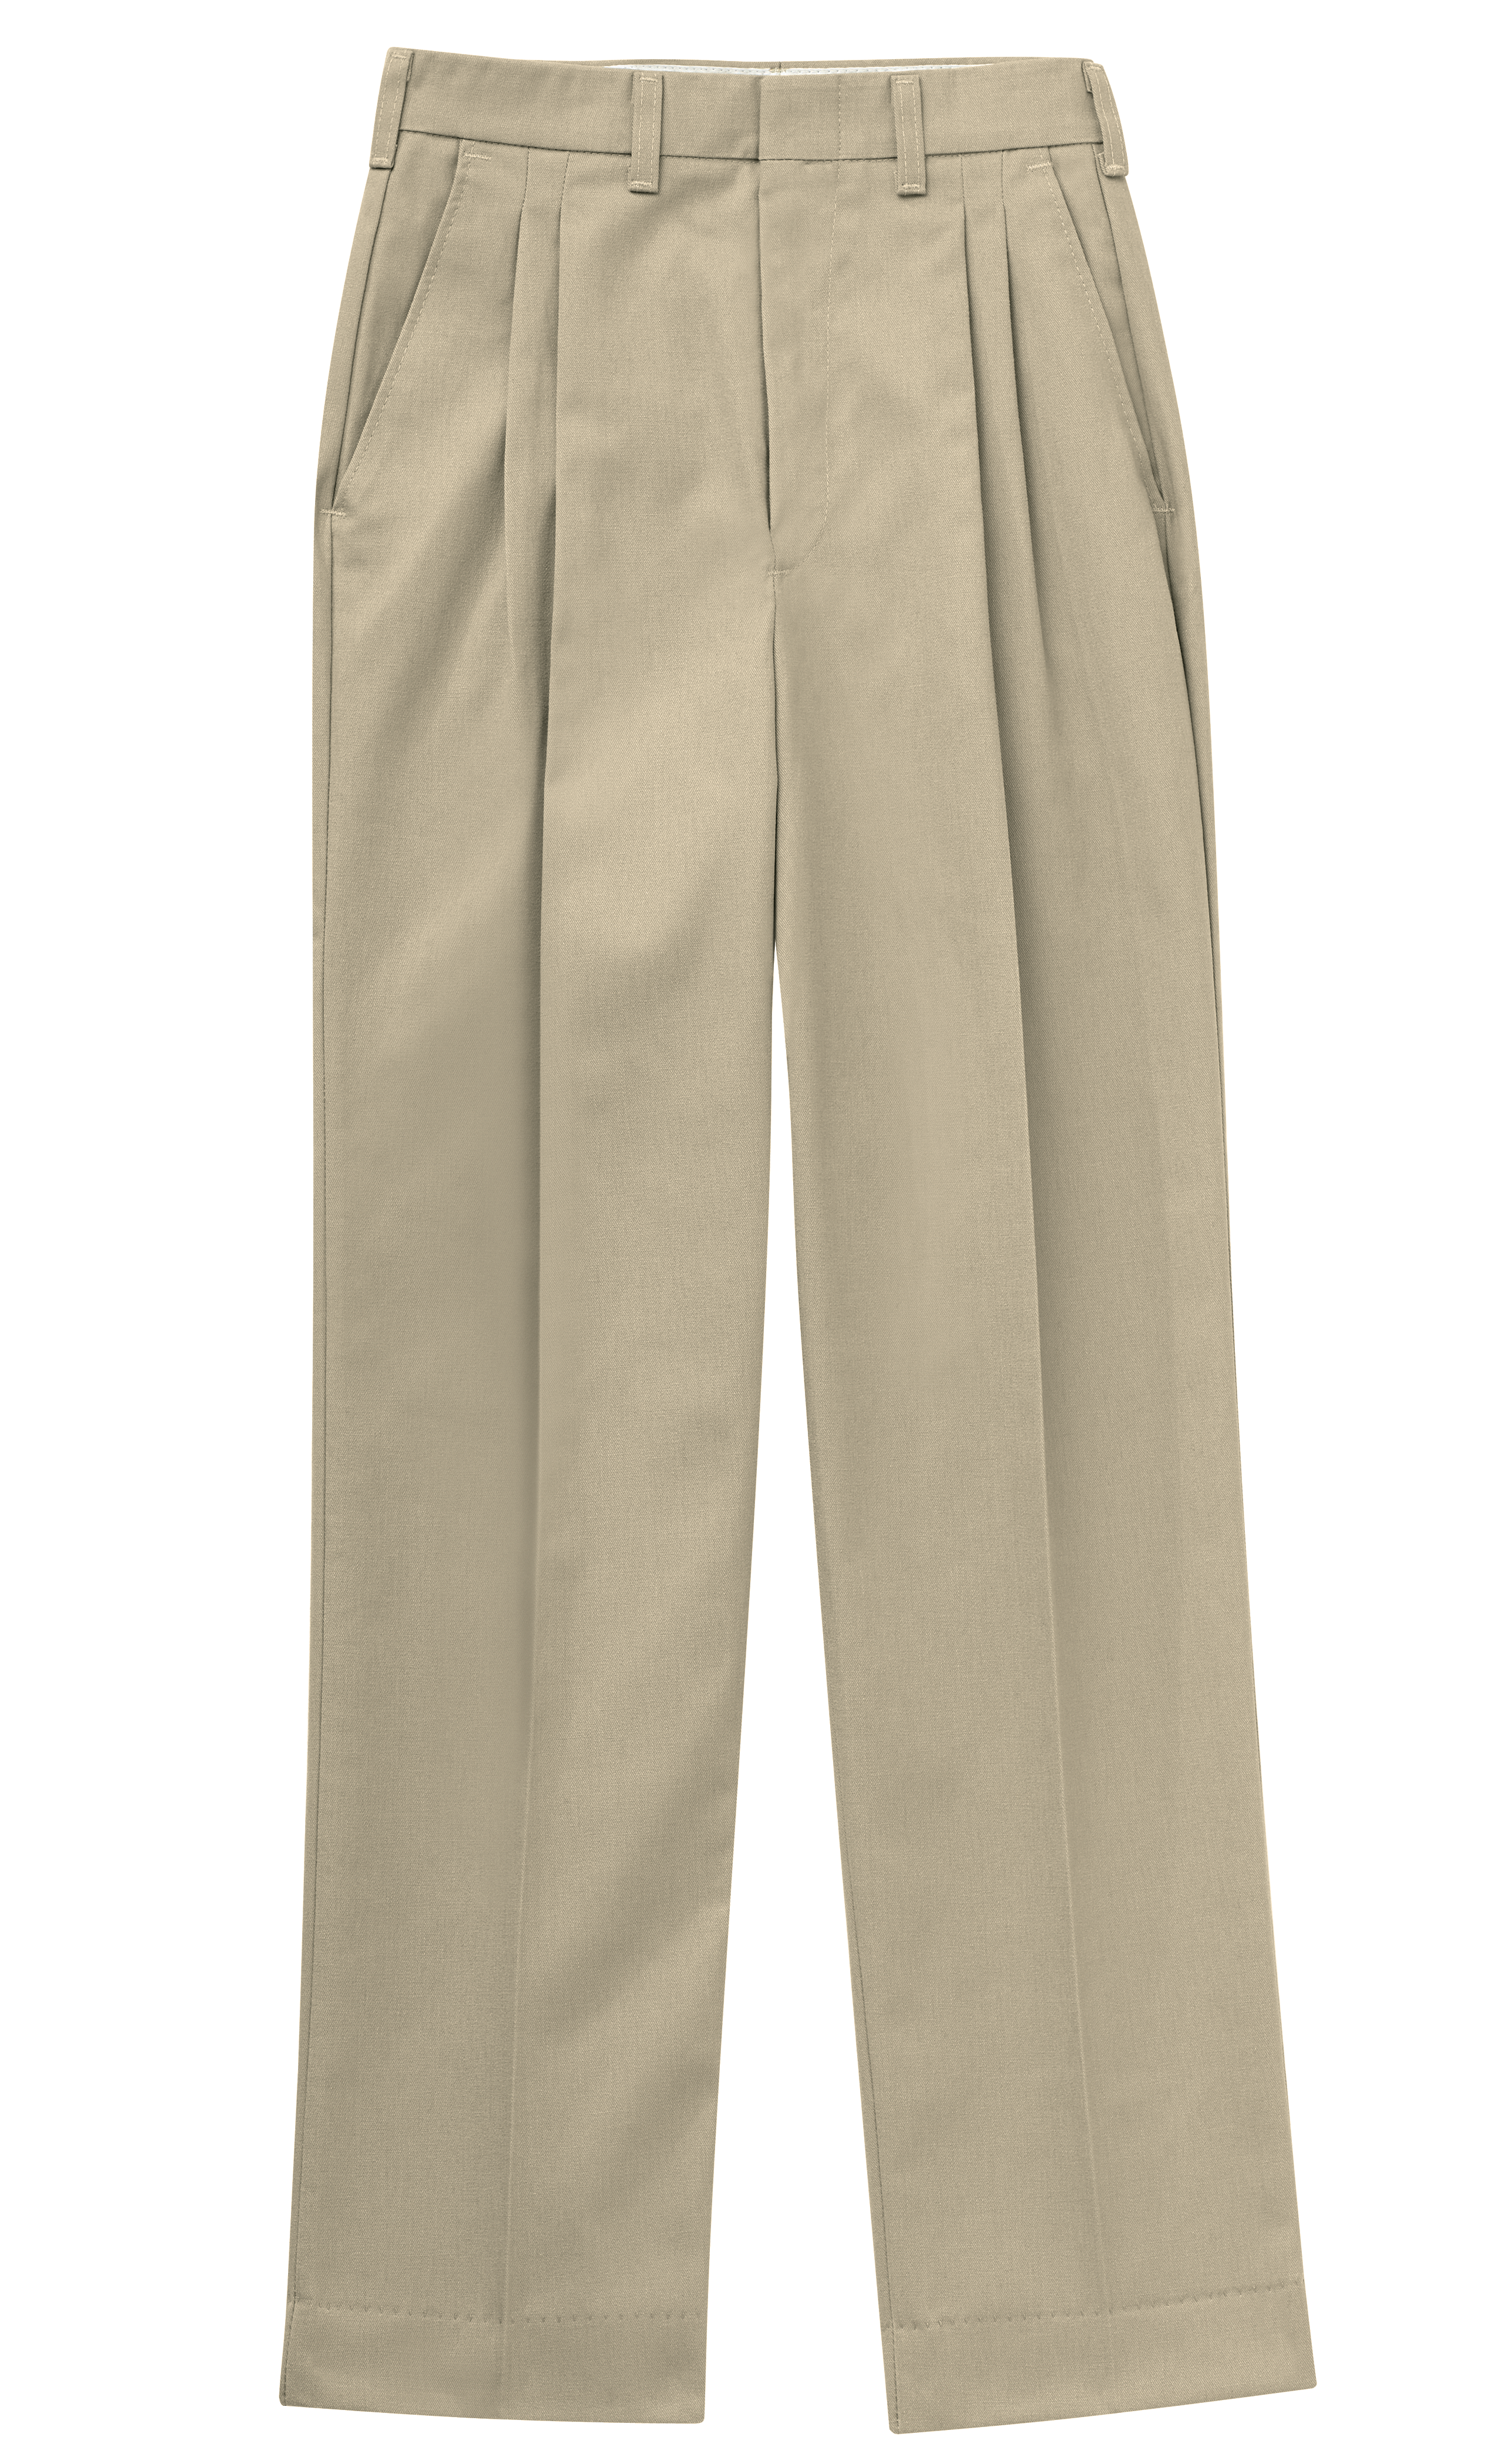 40/29 Louis Raphael Rosso Poly/Viscose Cuffed Pleated Flex Dress Pants,Red  Brown